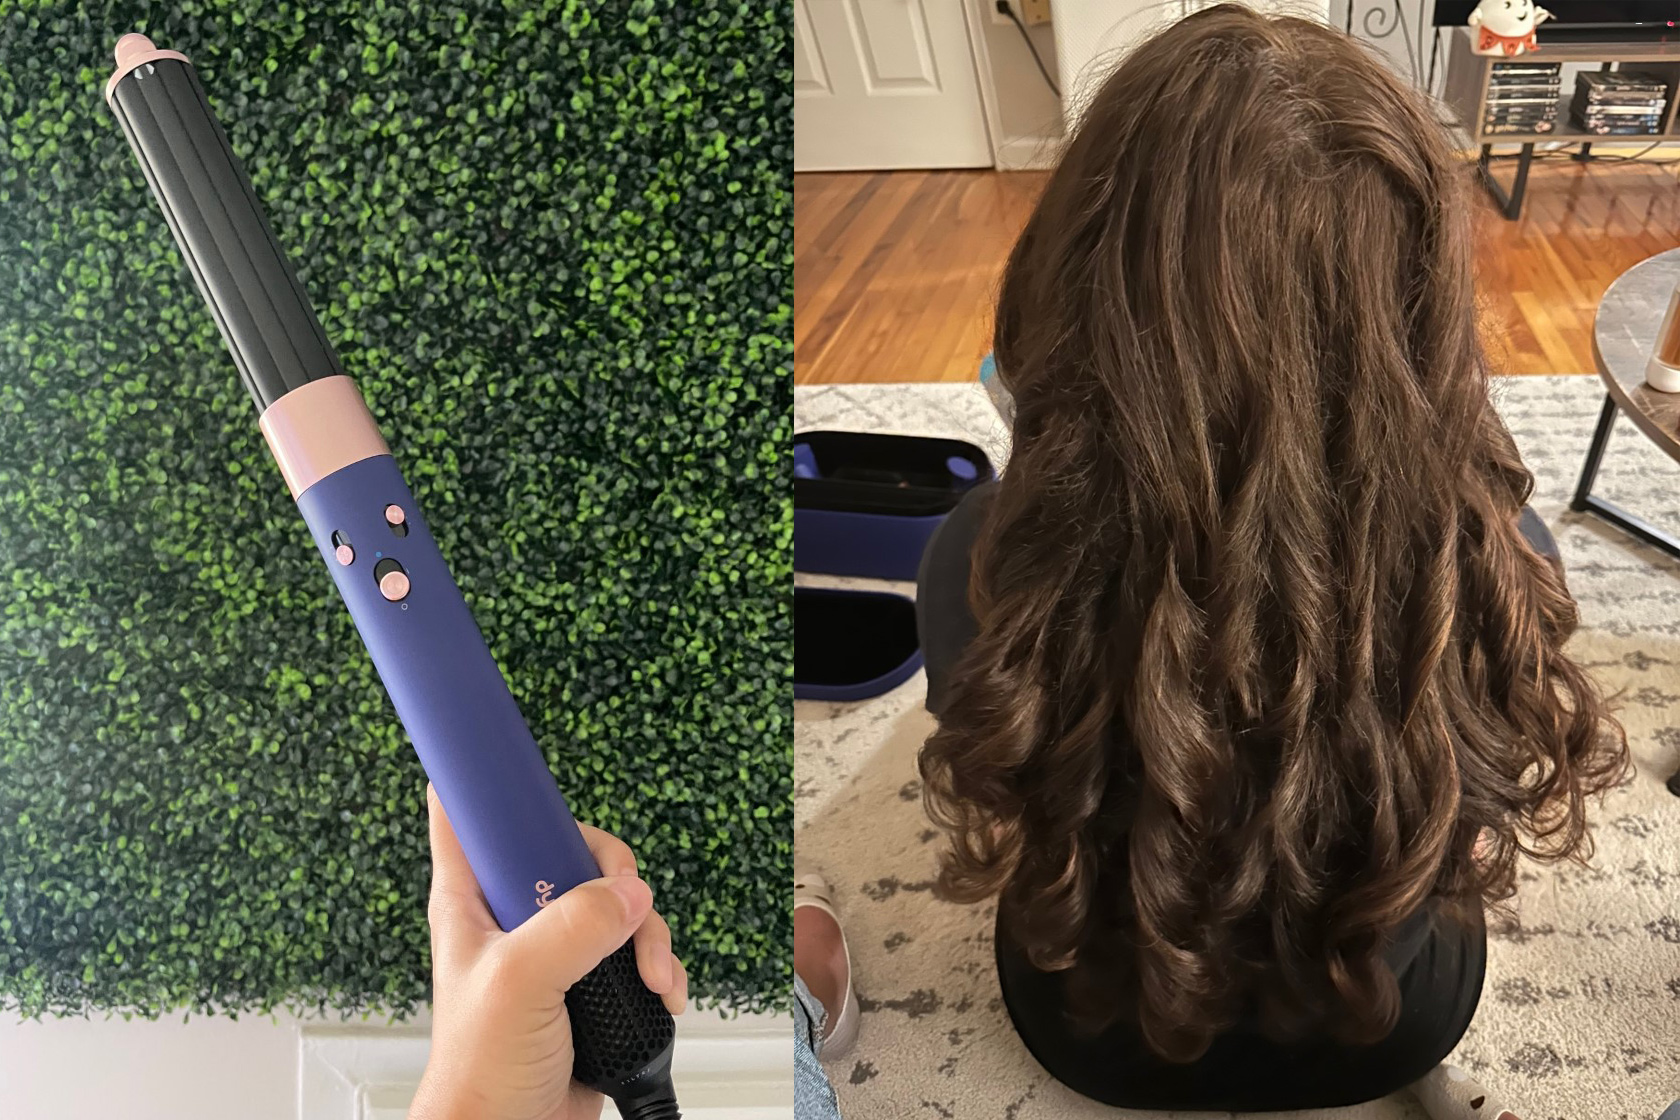 Dyson Airwrap review The new Airwrap is not my 1 favorite Dyson hair tool